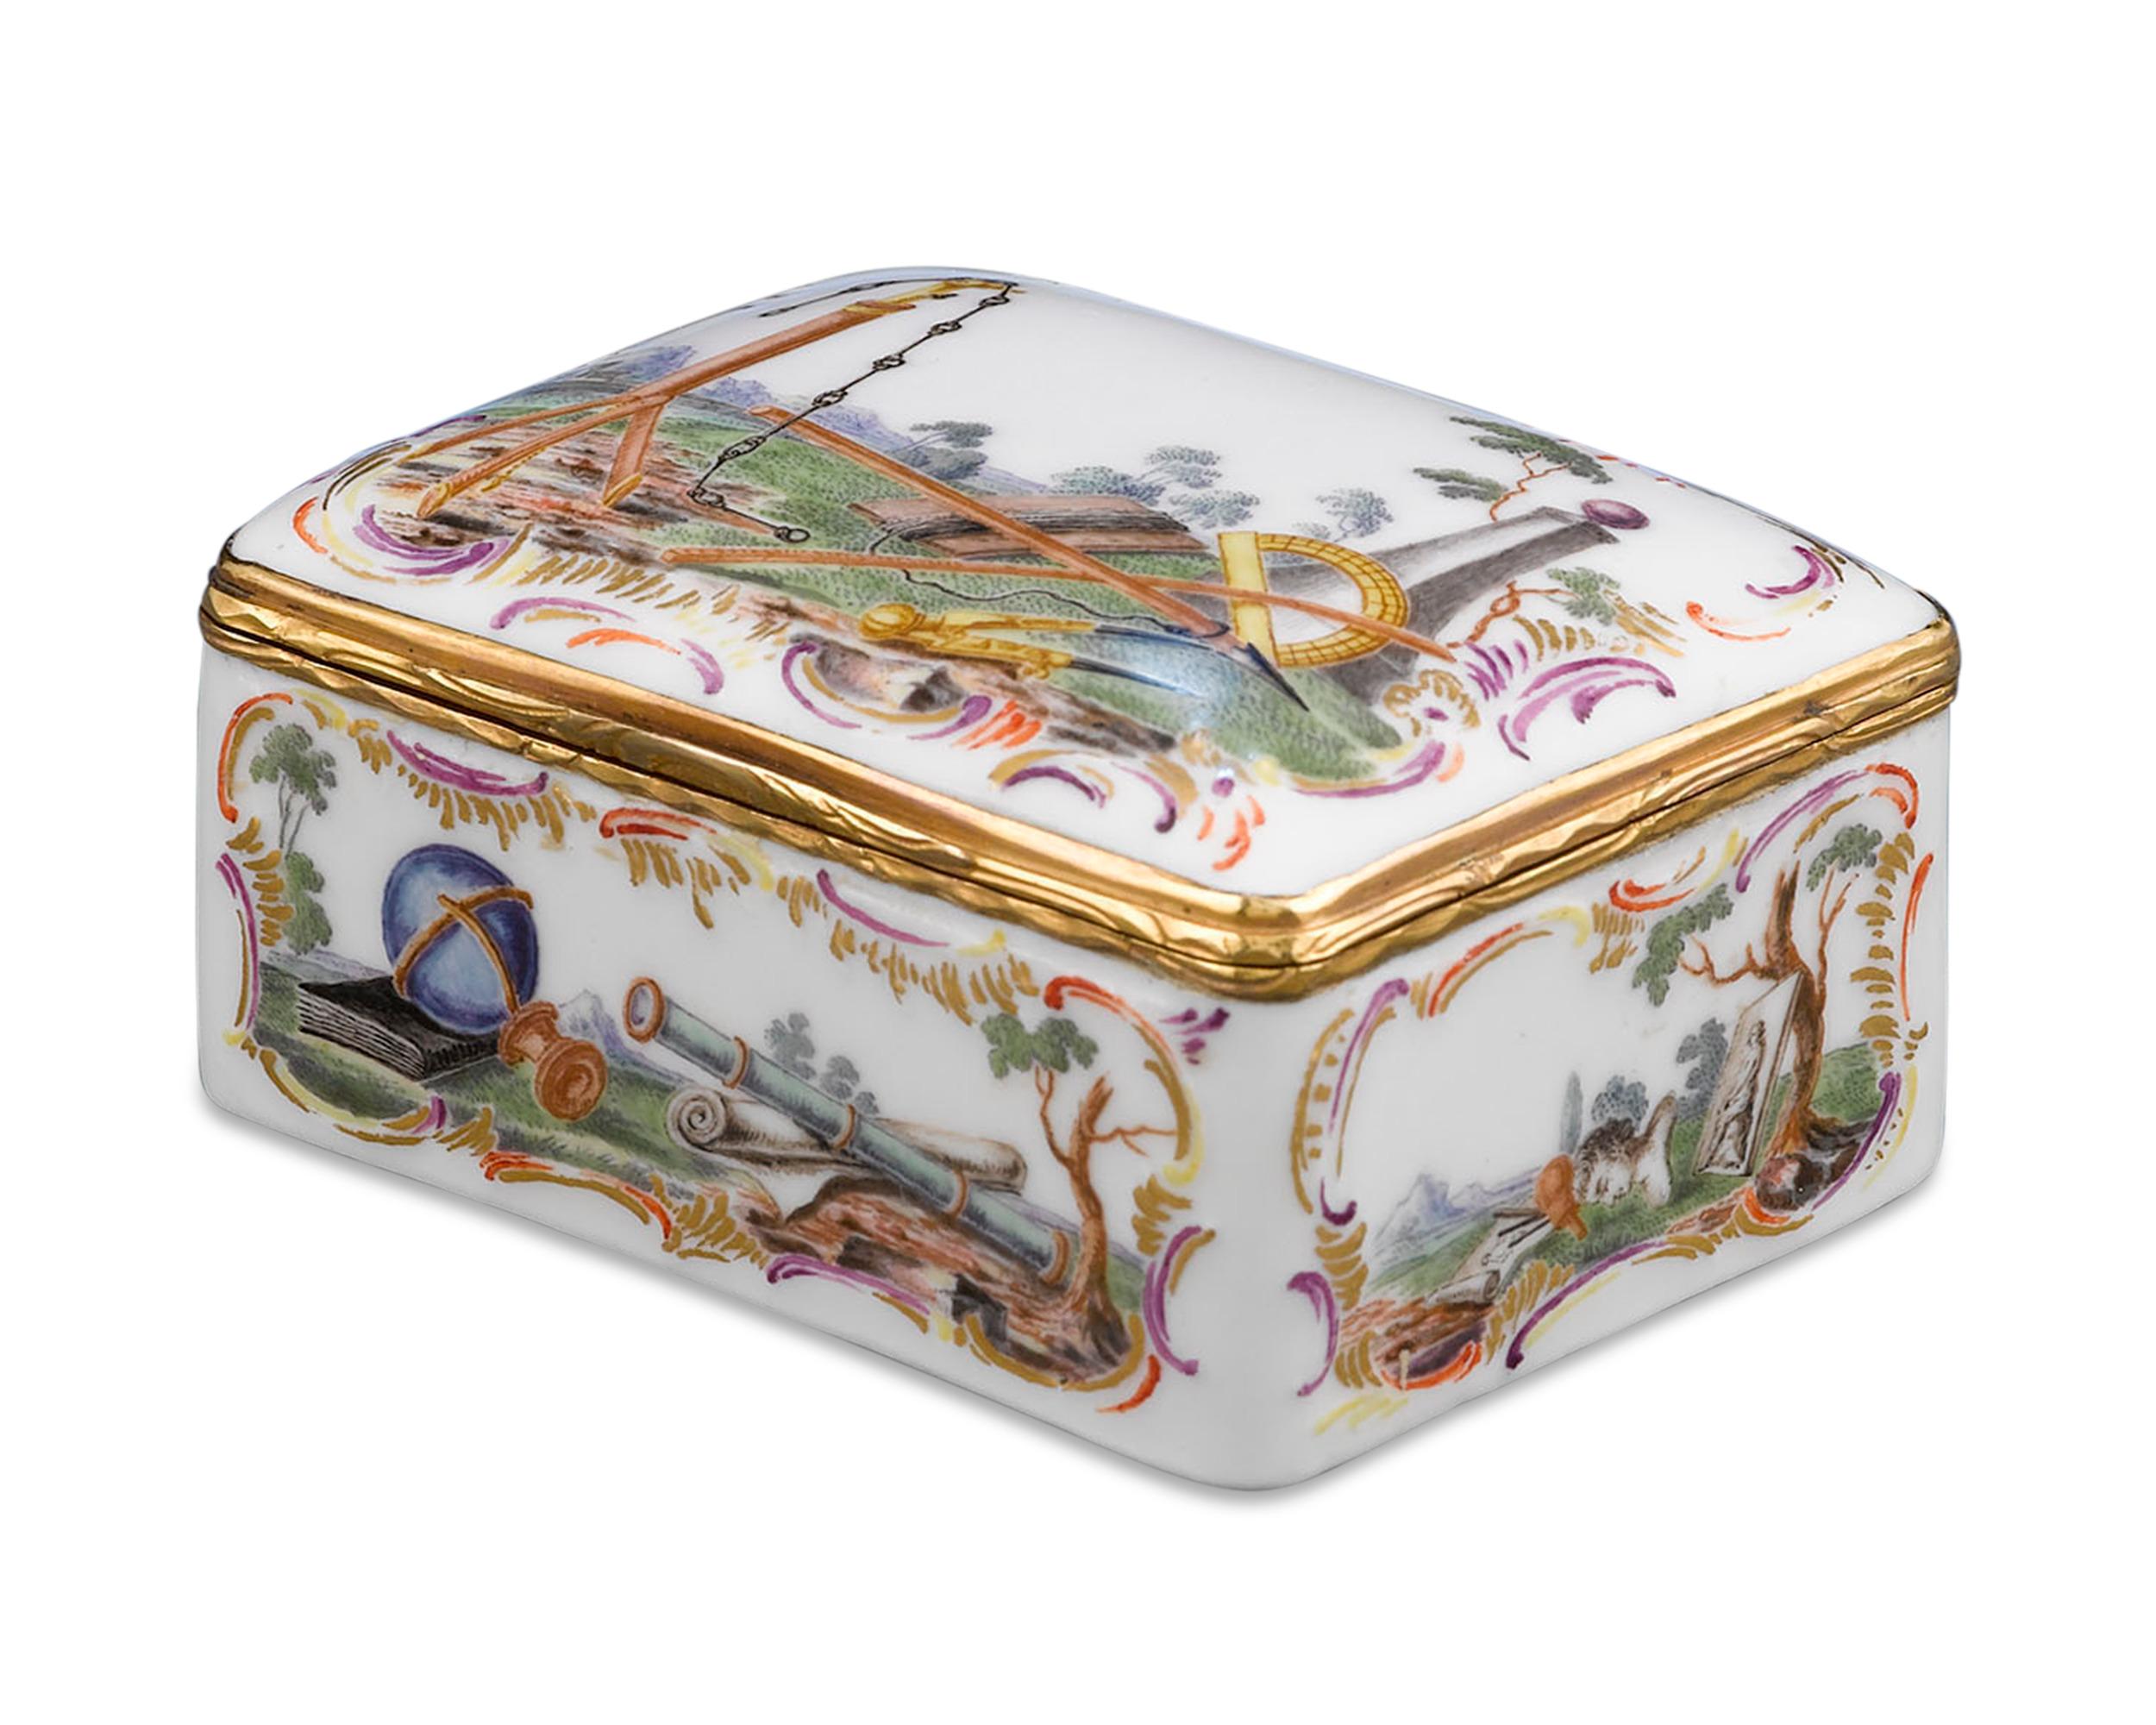 This important German porcelain snuff box exhibits delightful artistry and craftsmanship. Hand painted classical tableau celebrating the exalted disciplines of art, architecture, music and astronomy adorn every surface of the small container, while